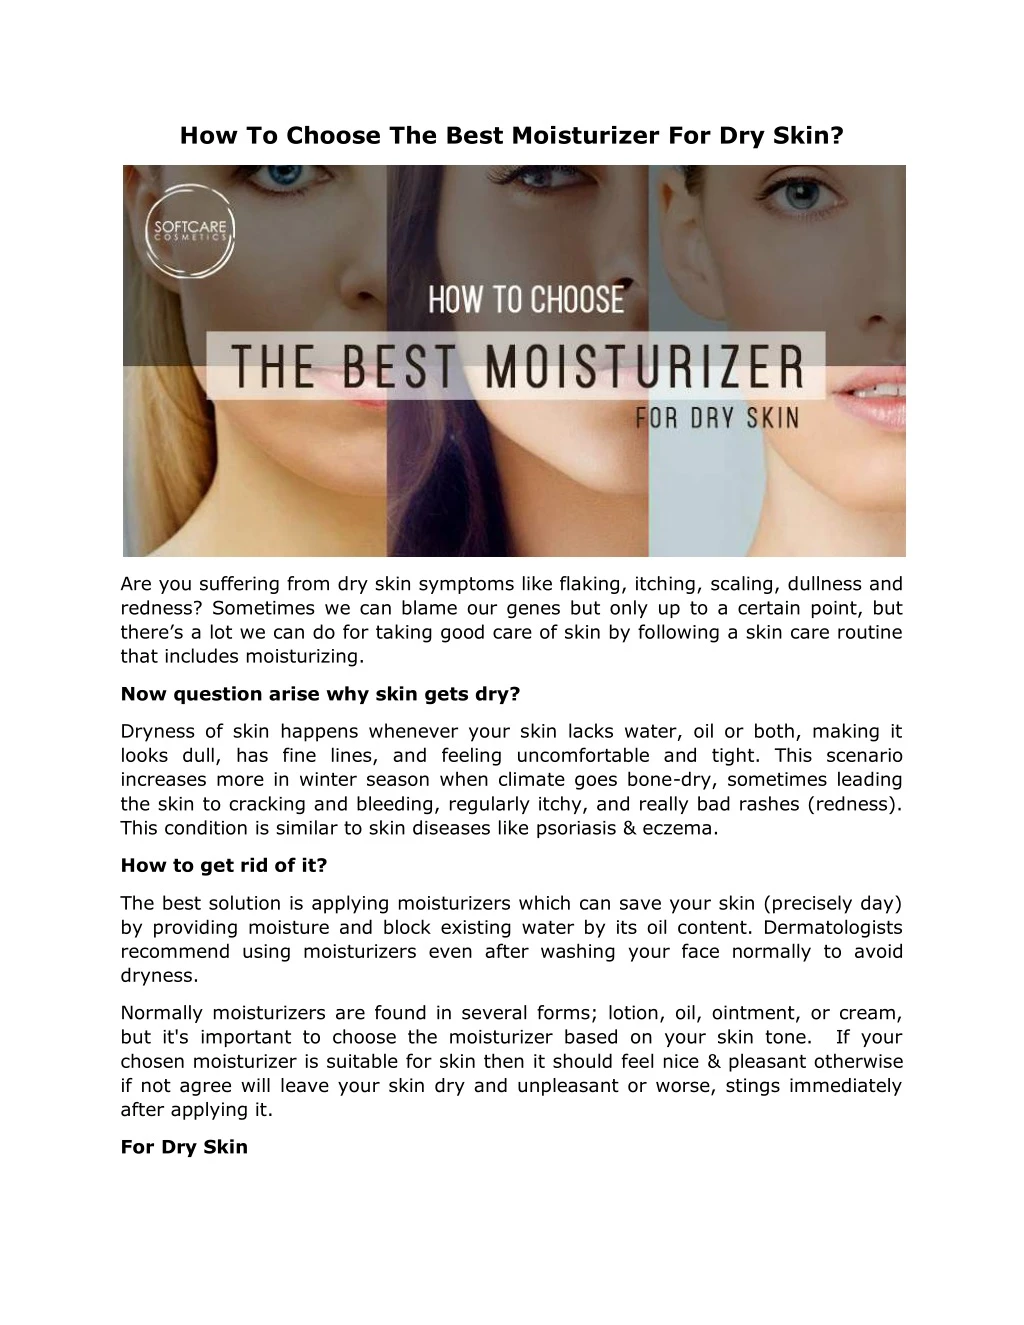 how to choose the best moisturizer for dry skin